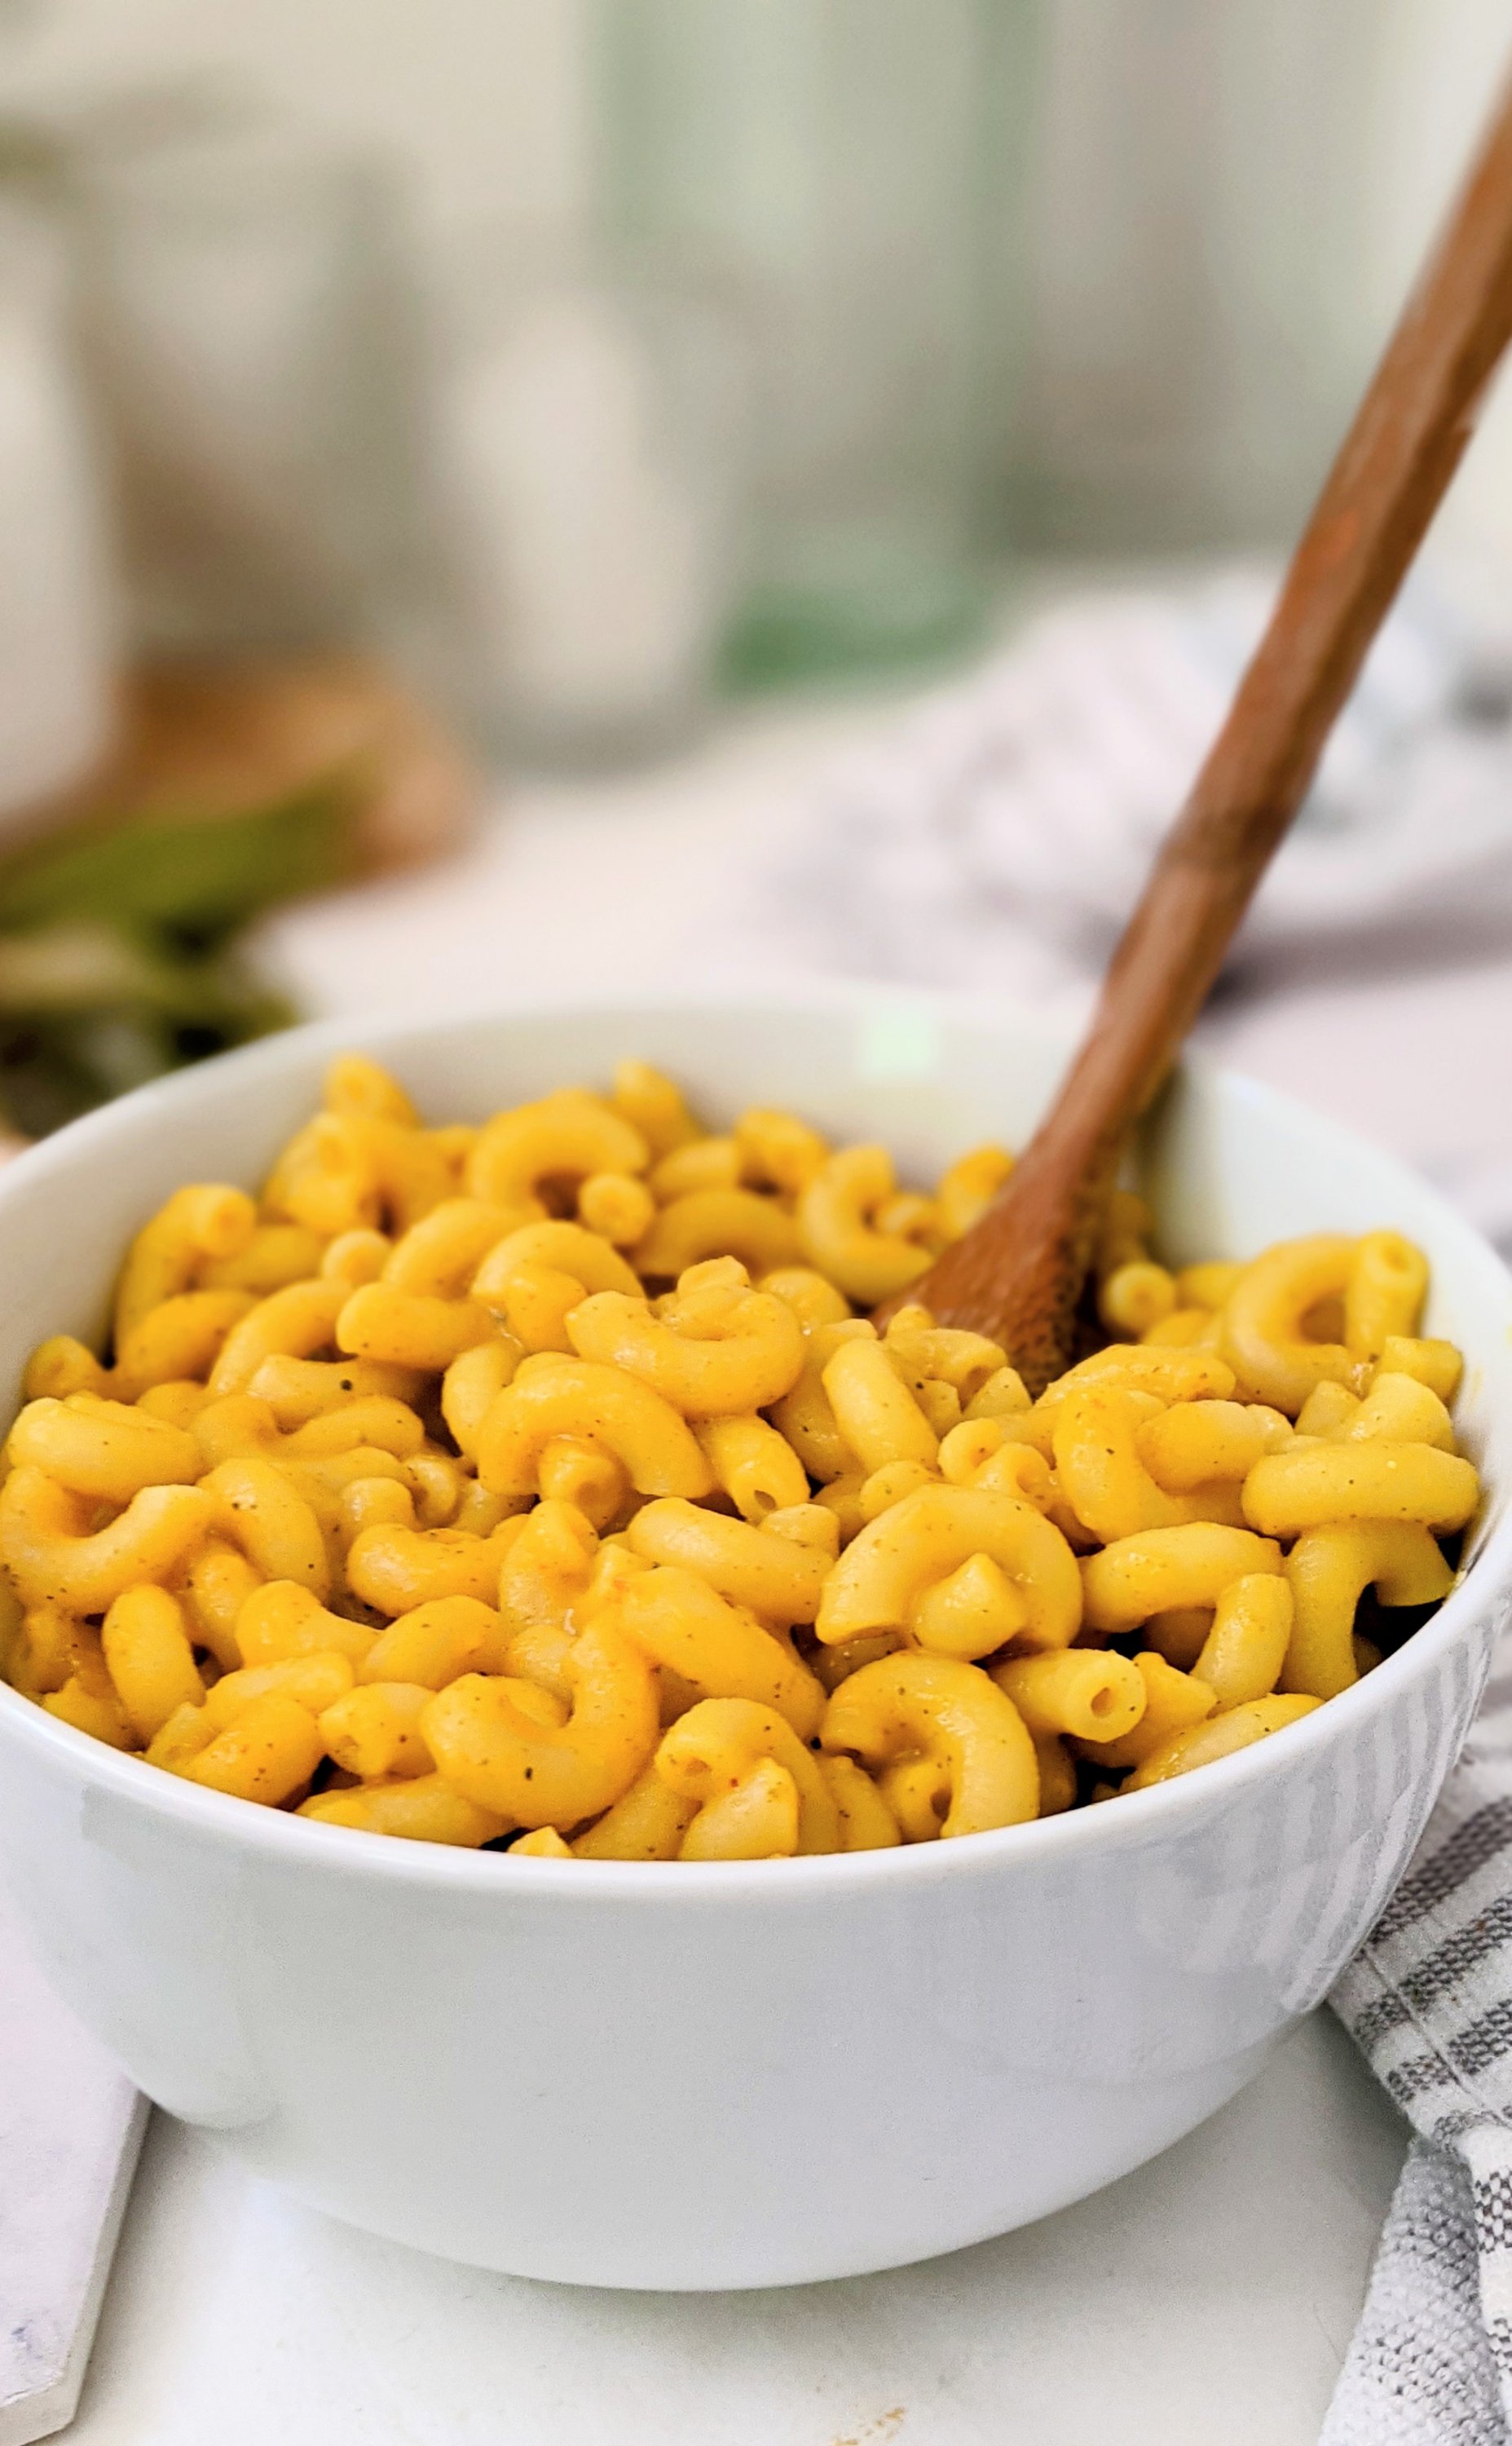 macaroni and cheese allergy friendly pasta recipes vegan macaroni and cheese gluten free dairy free oil free mac and cheese recipes healthy plant based dinner ideas for kids recipes vegan gluten free no nuts